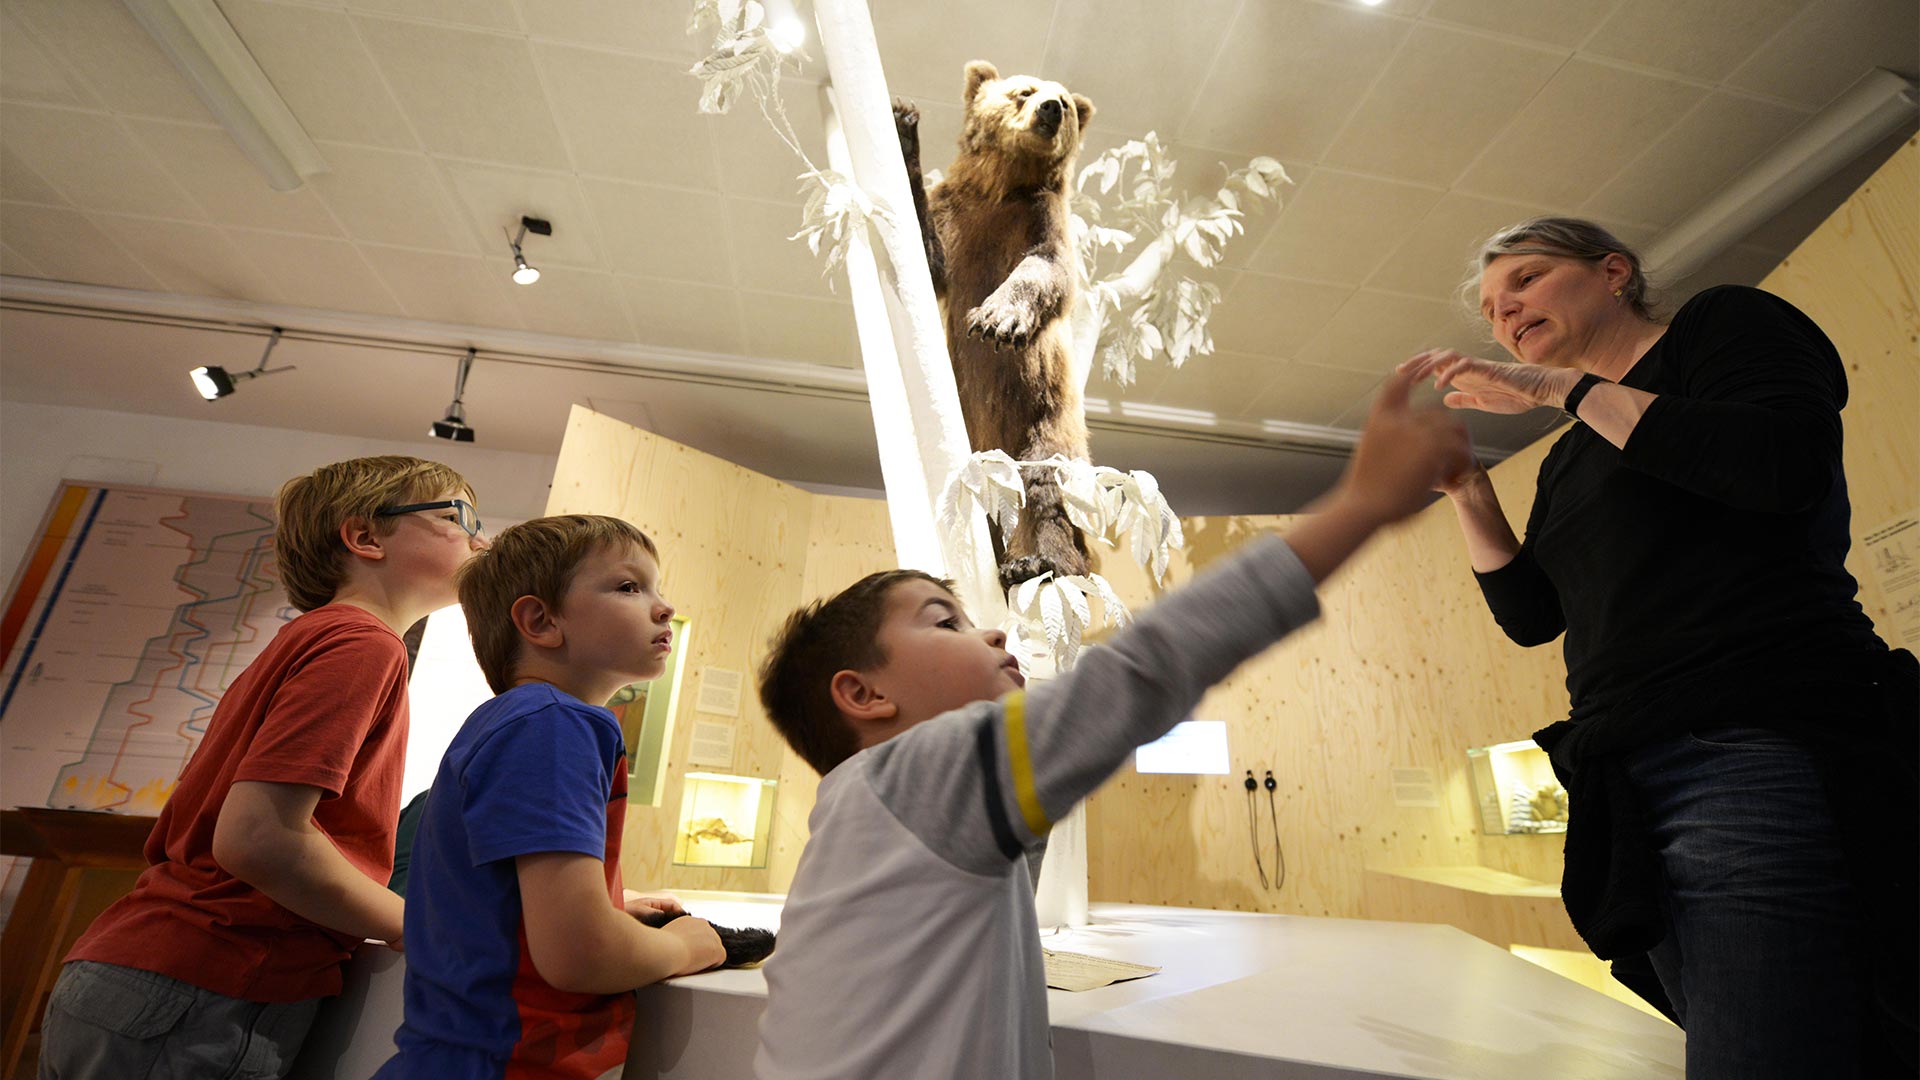 A teacher dressed in black shows three blond children what to see in the museum.